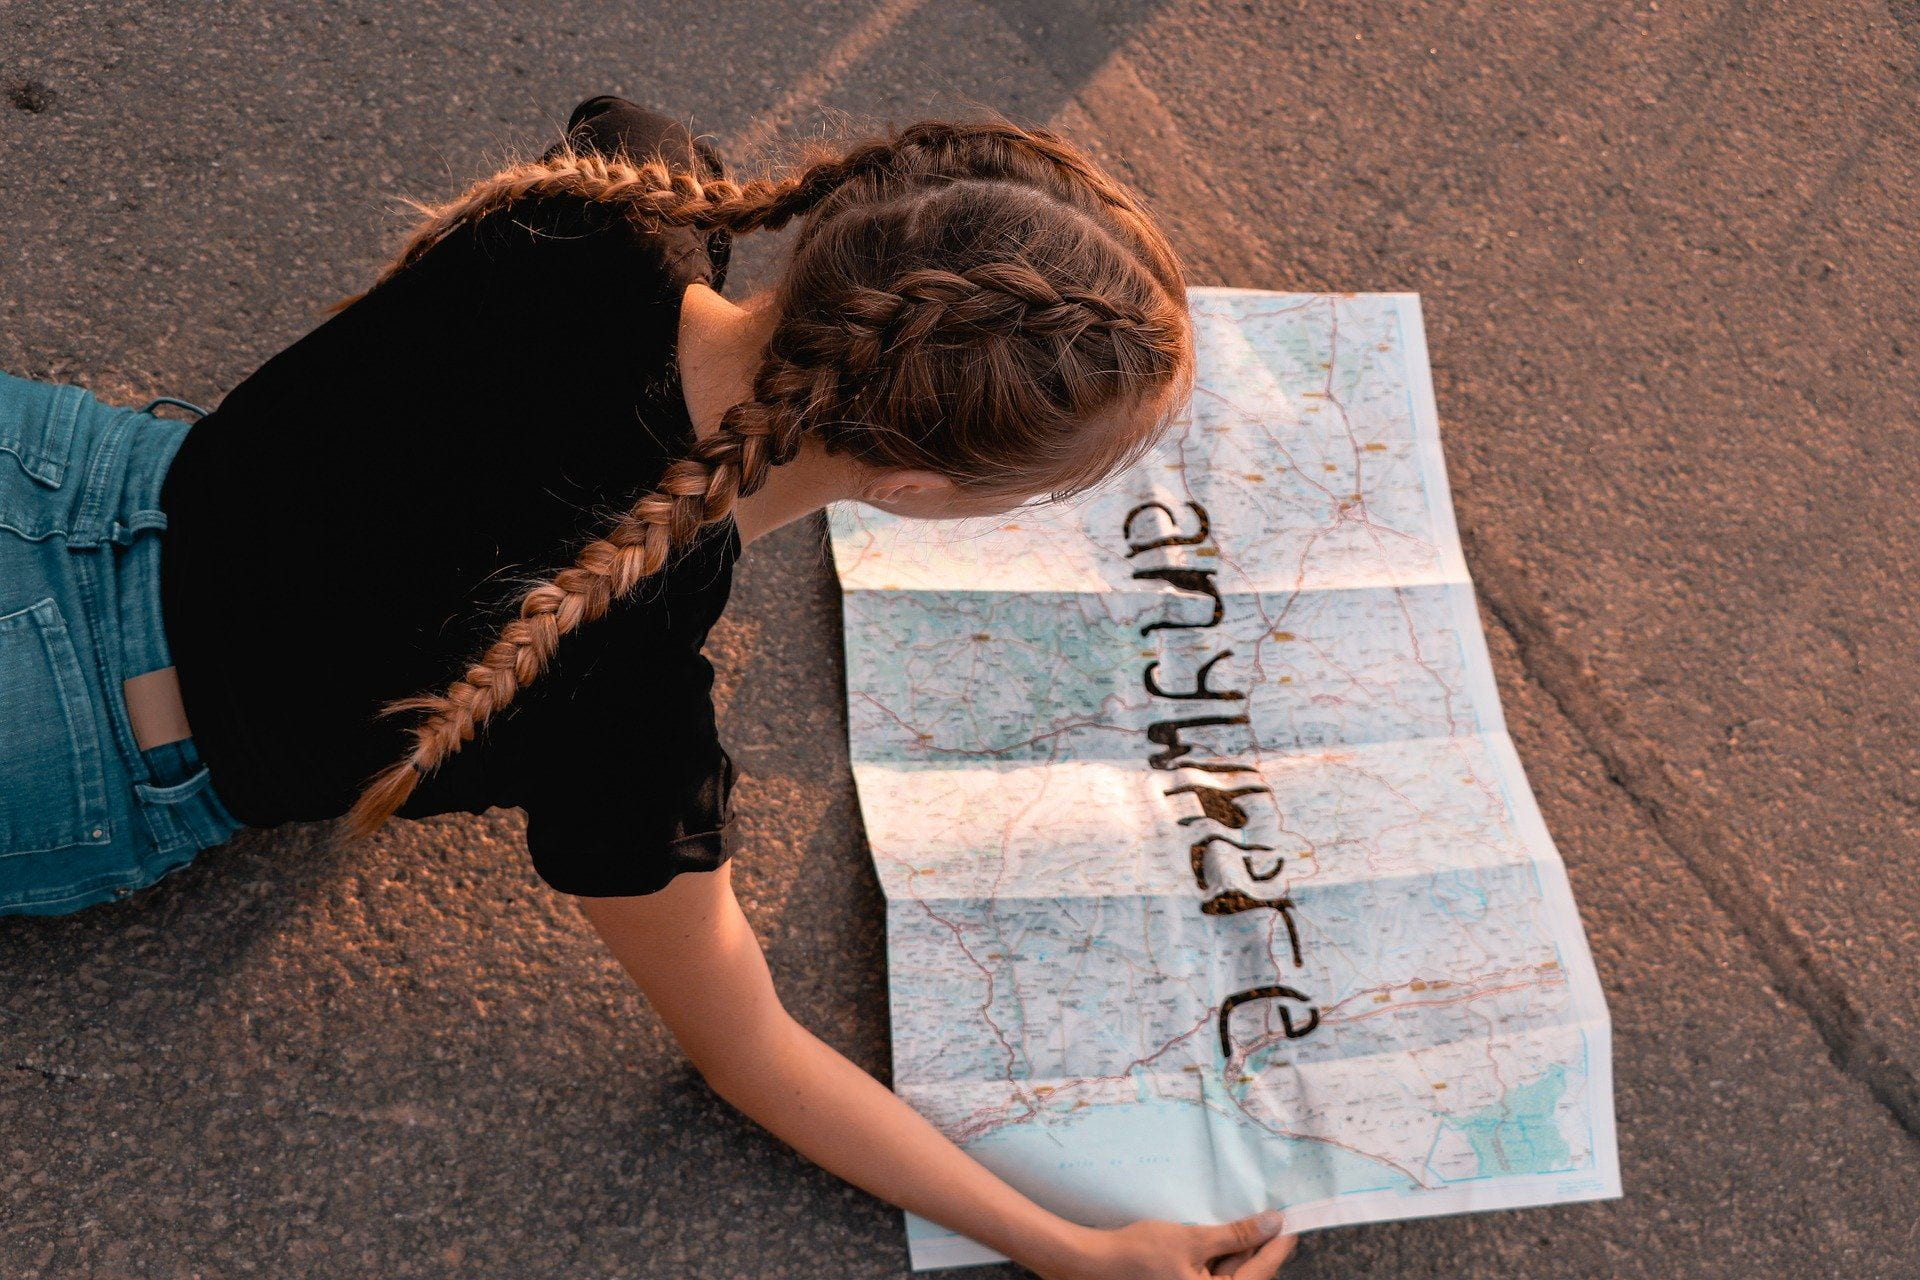 Girl looking at map with anywhere written on it